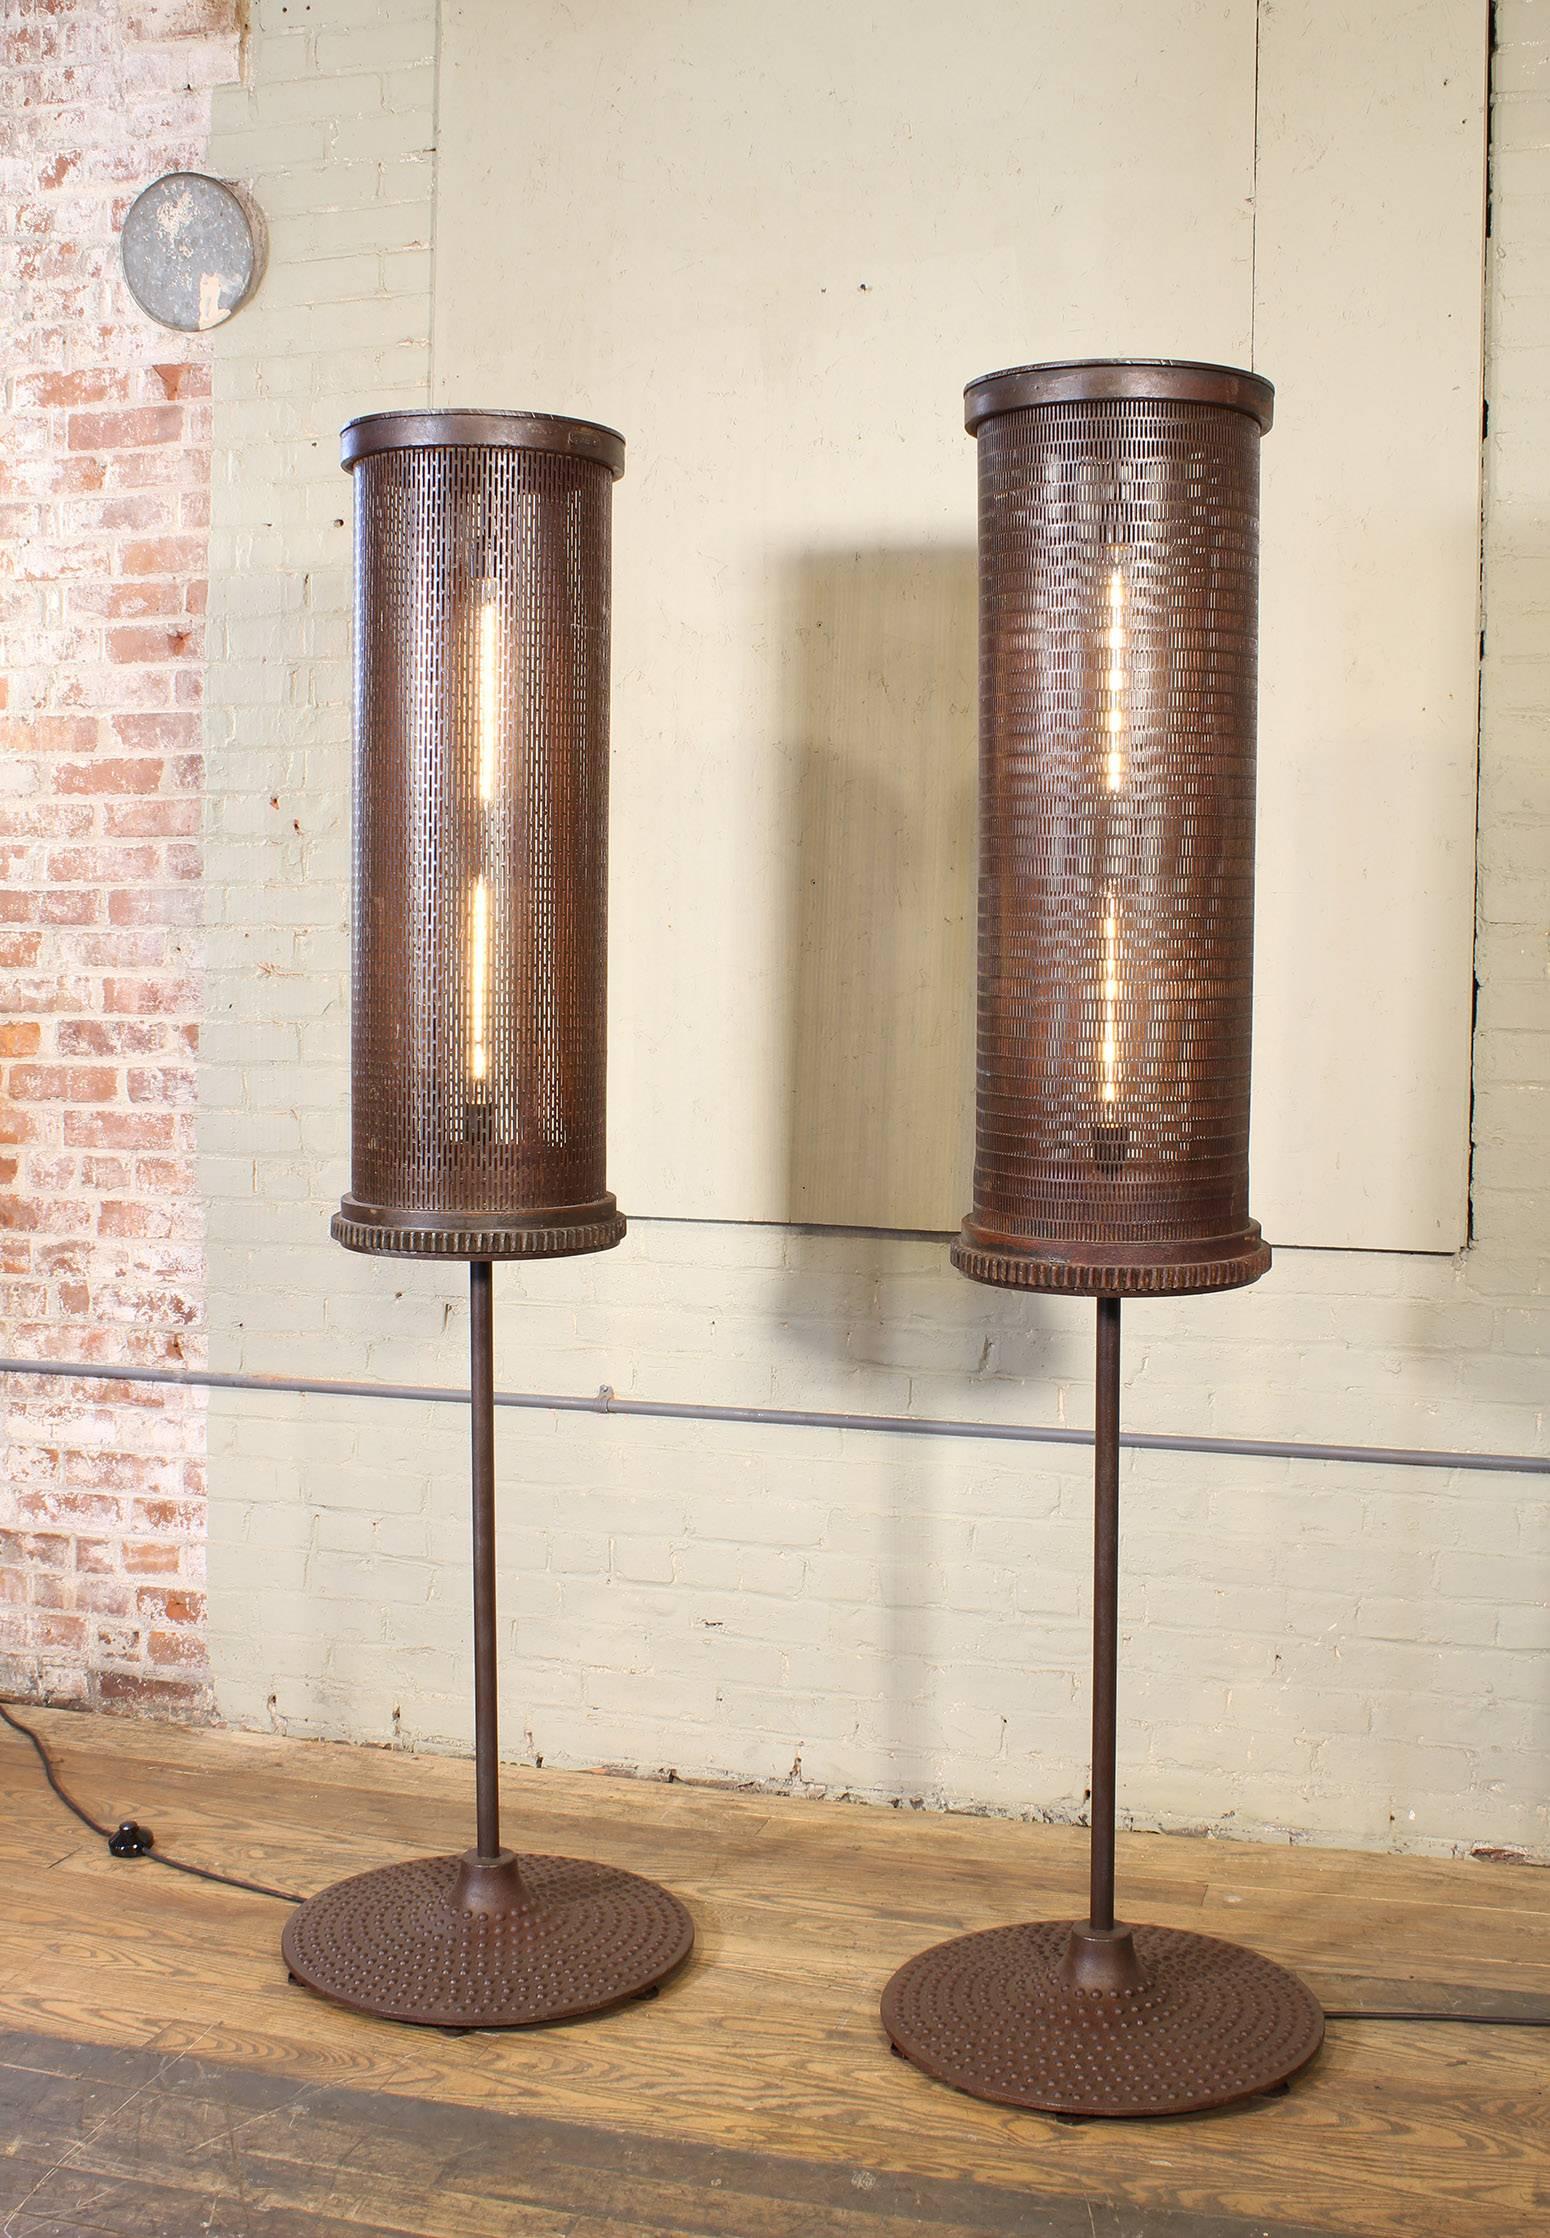 Pair of Industrial / Brutalist style 6' floor lamps. Turn of the century factory tumblers atop vintage steel machine bases. Features a foot switch and 40w Edison style tube bulbs. 72